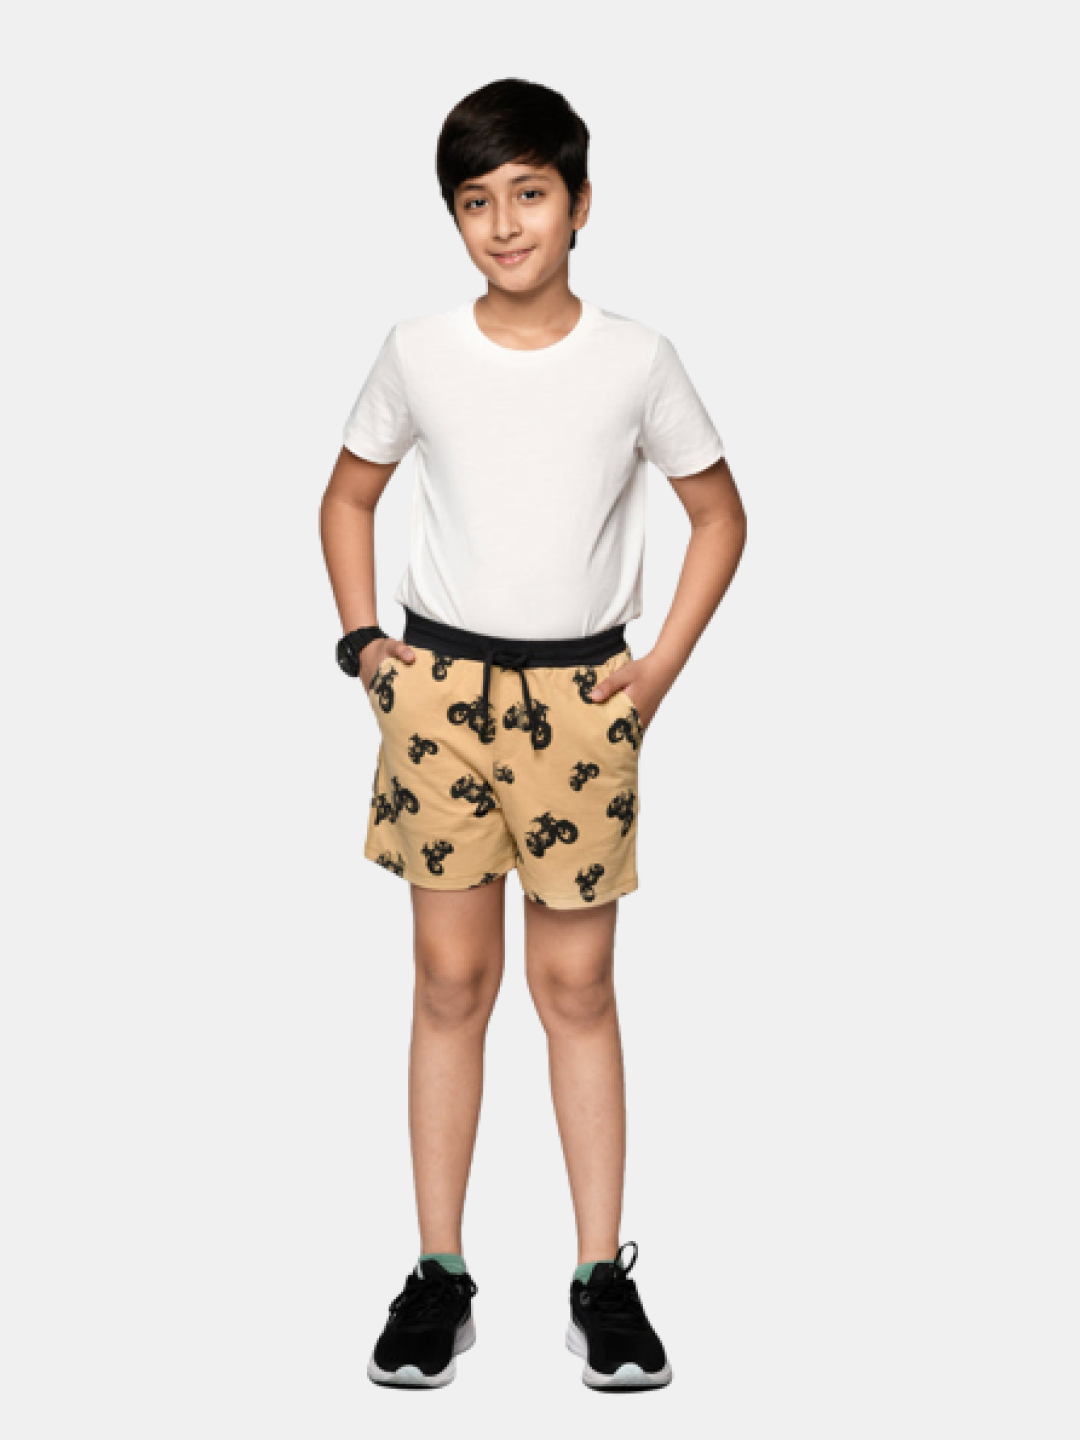 Dazzling Scooter Print Half Pant For Boys